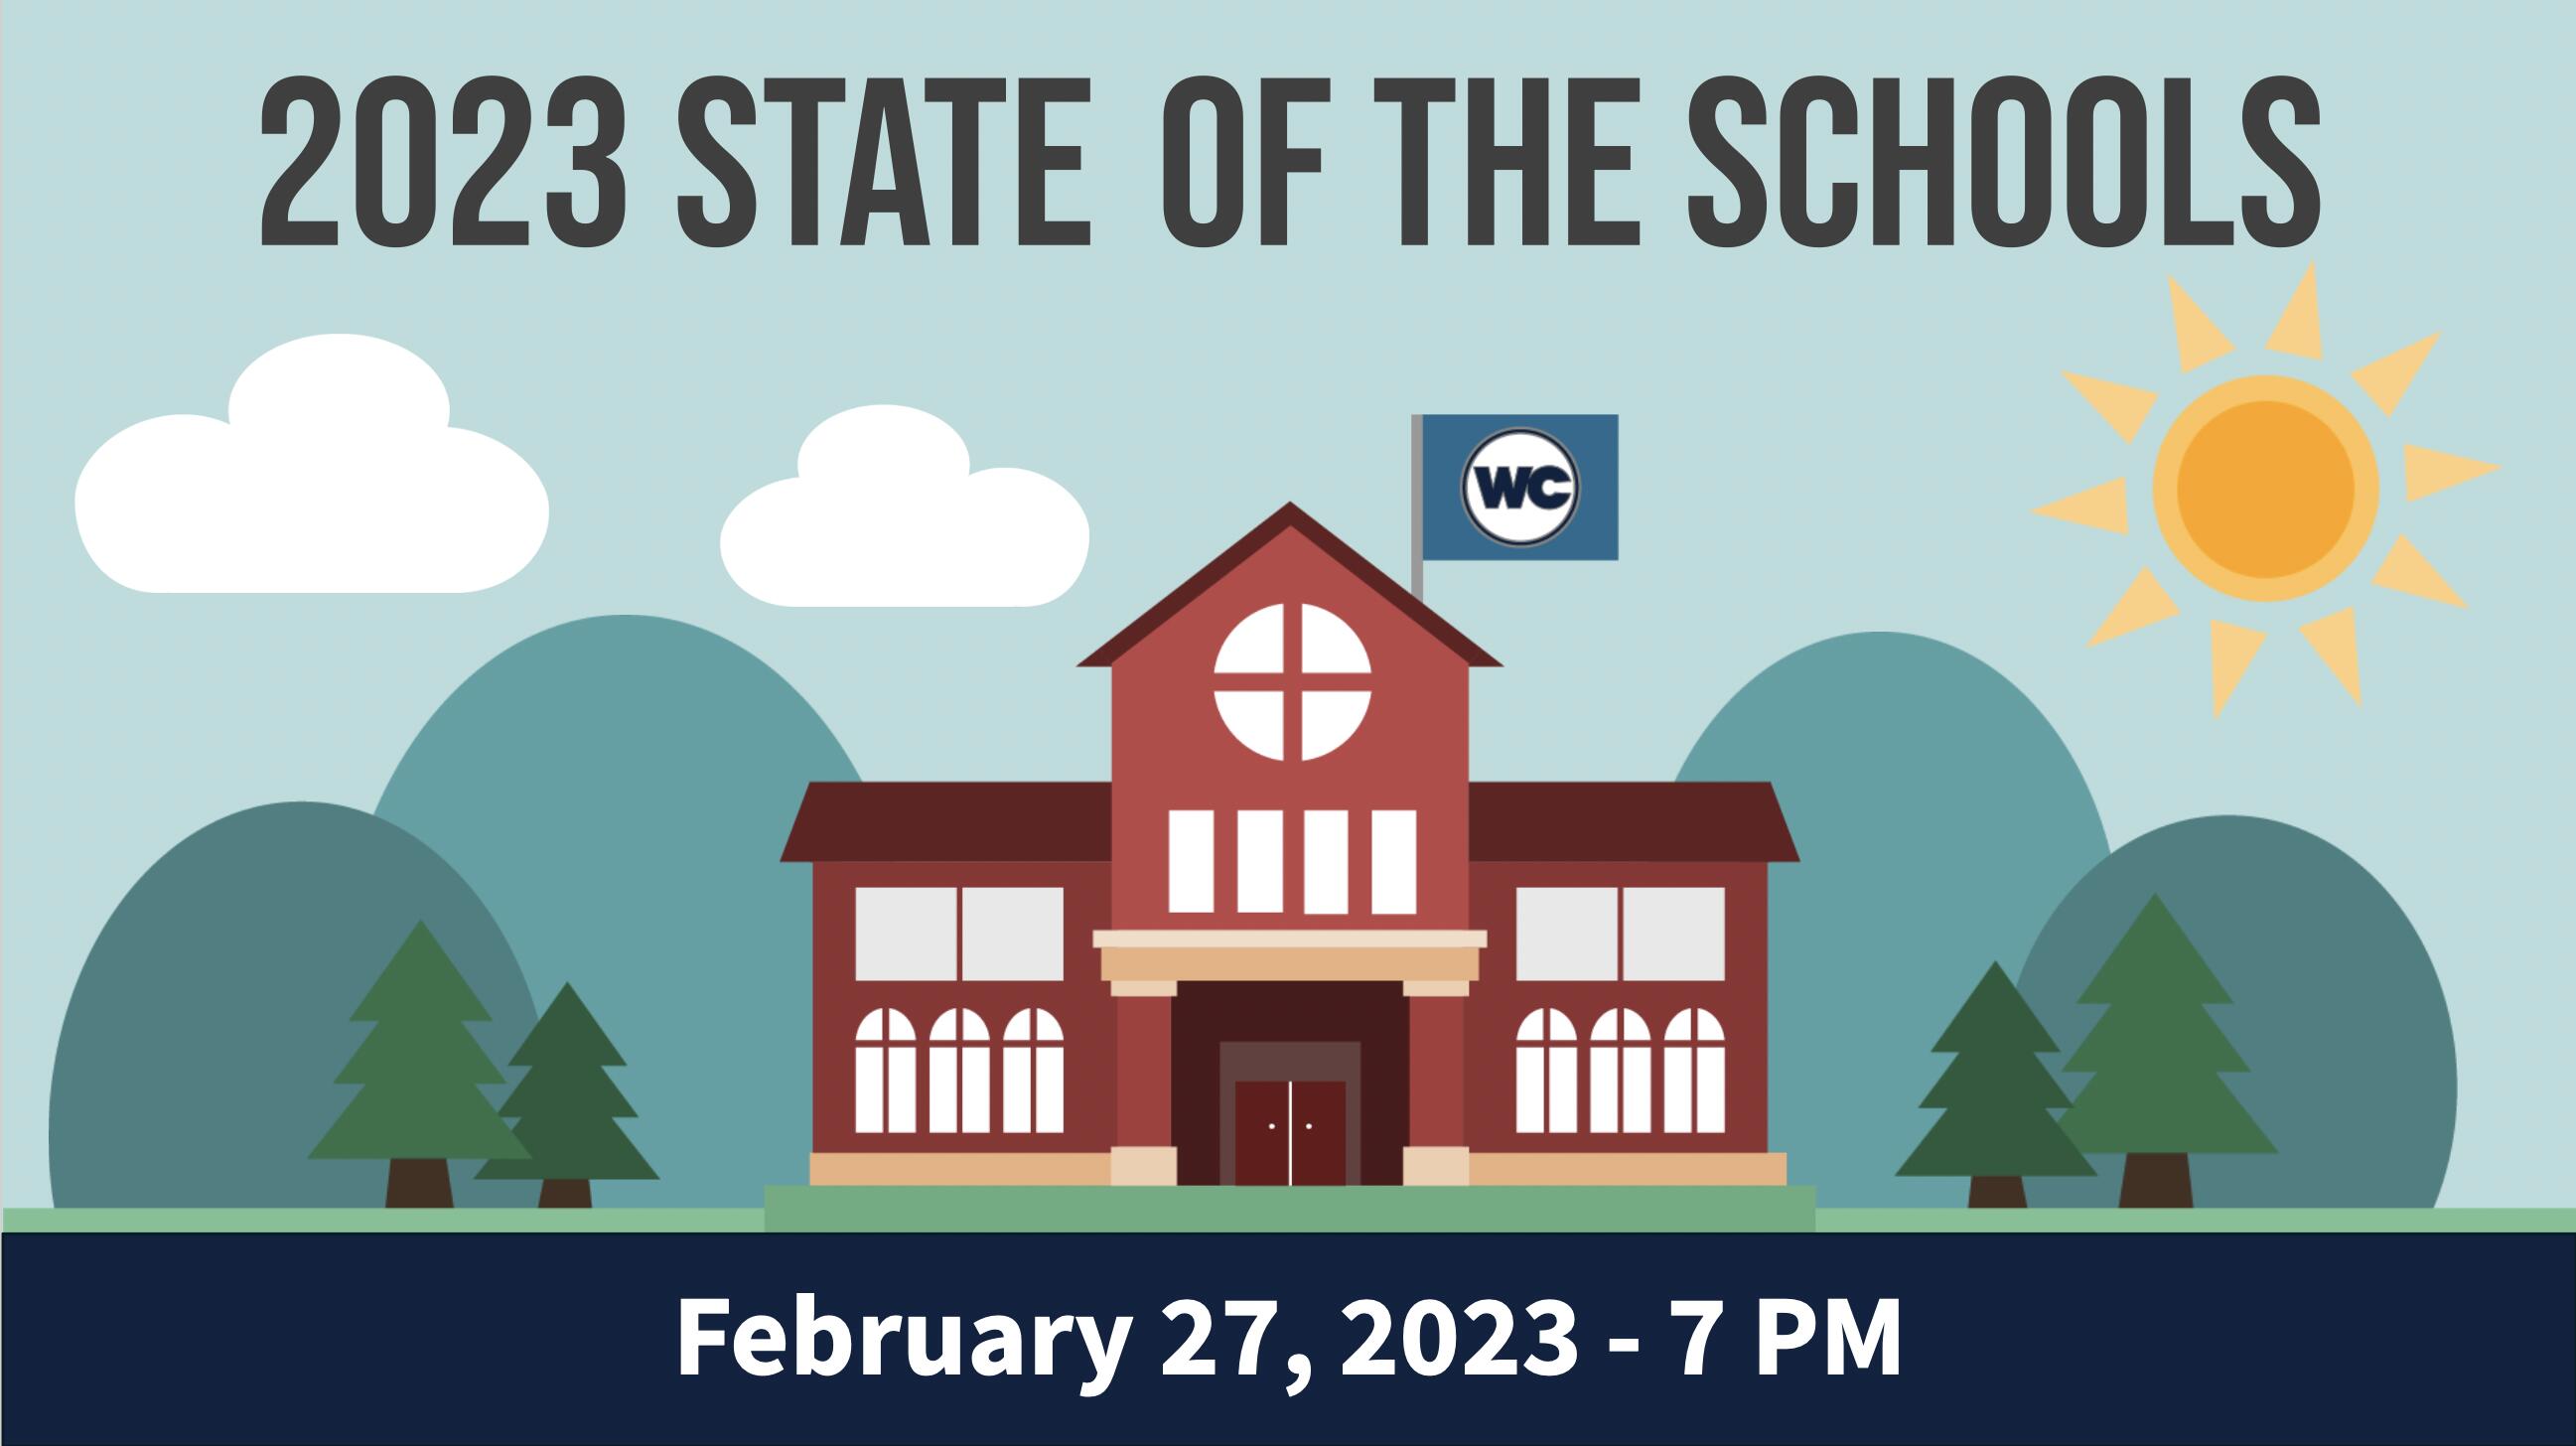 2023 State of the Schools - February 27th at 7:00 PM